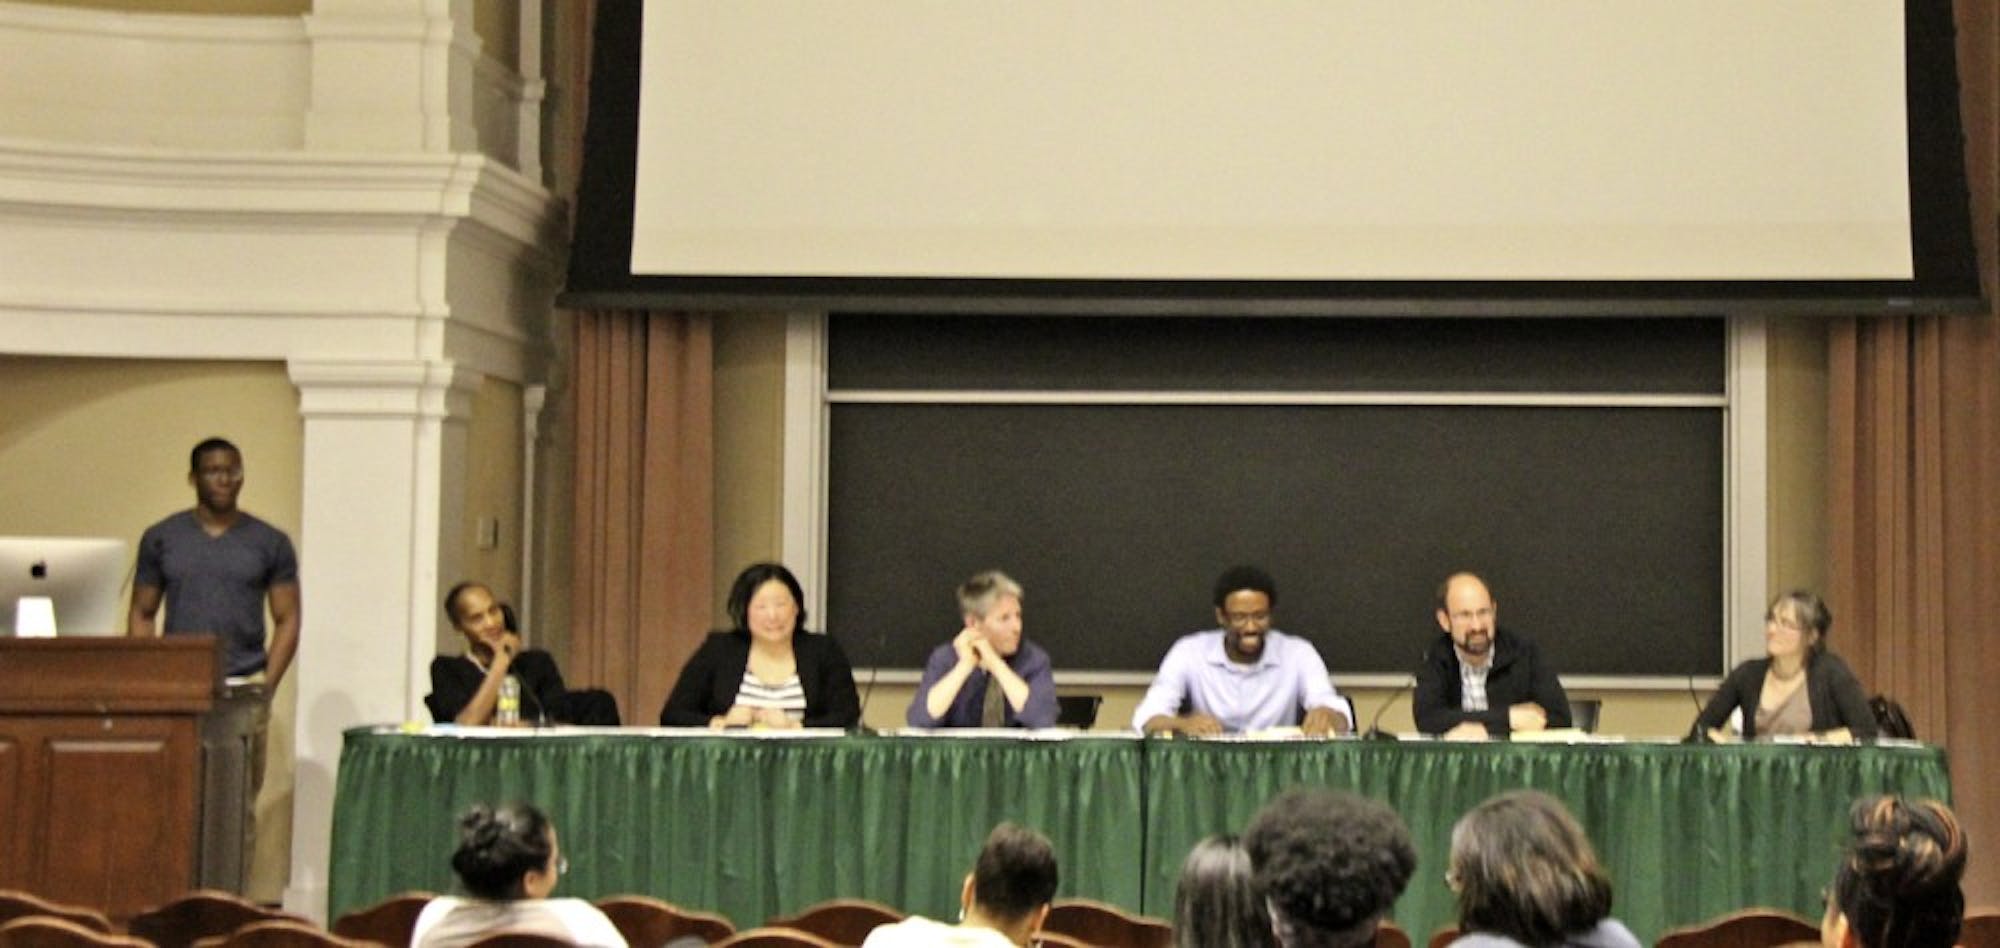 Dartmouth's chapter of the NAACP hosted a panel yesterday to discuss faculty diversity